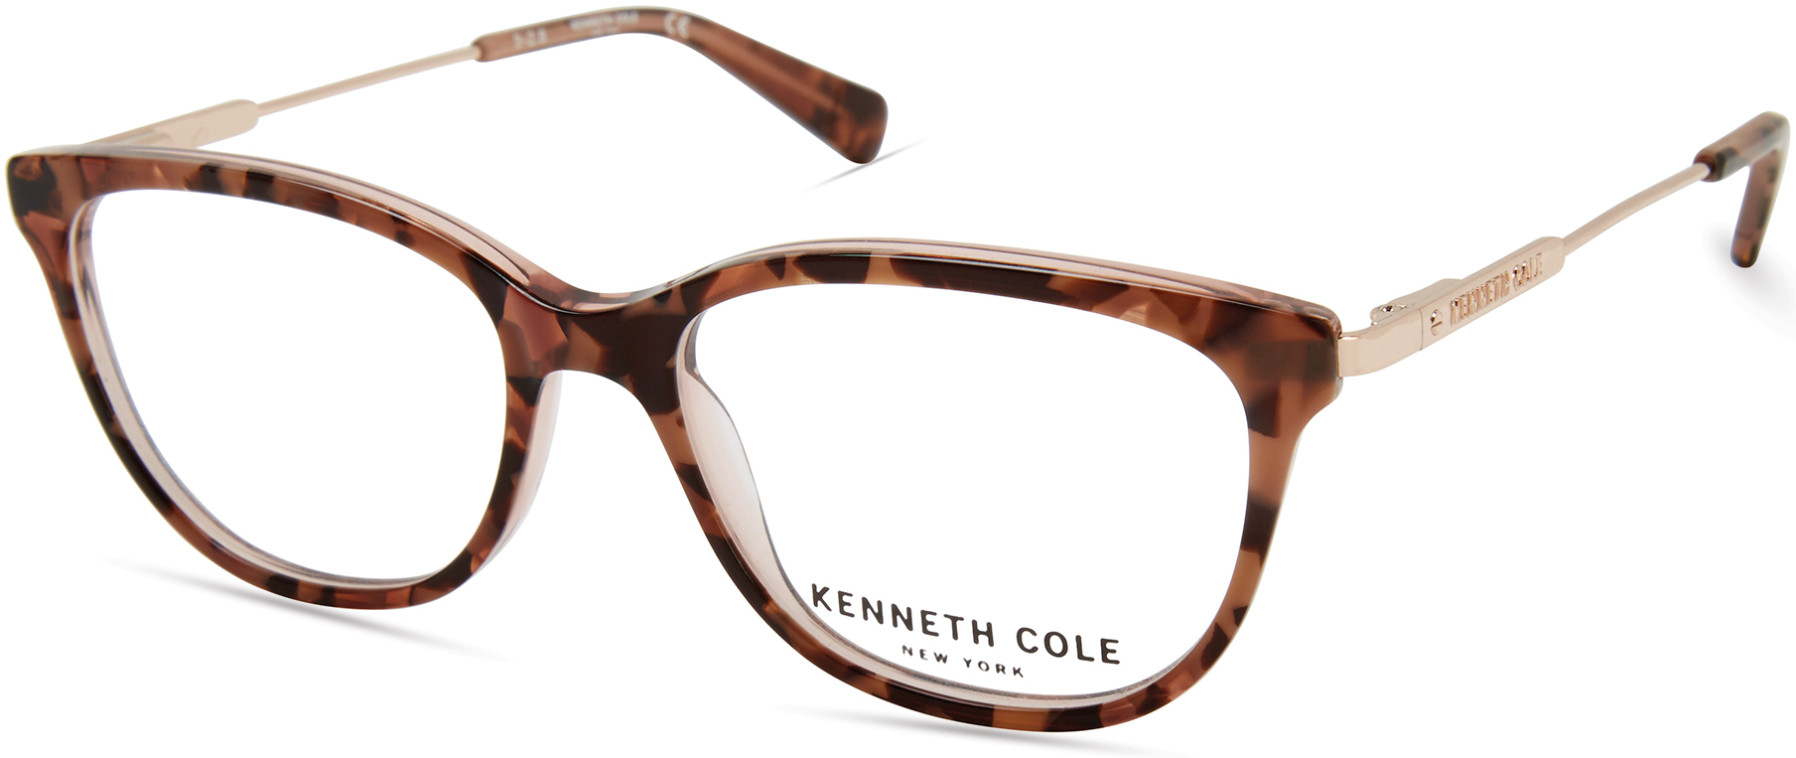 KENNETH COLE NY 0298 073